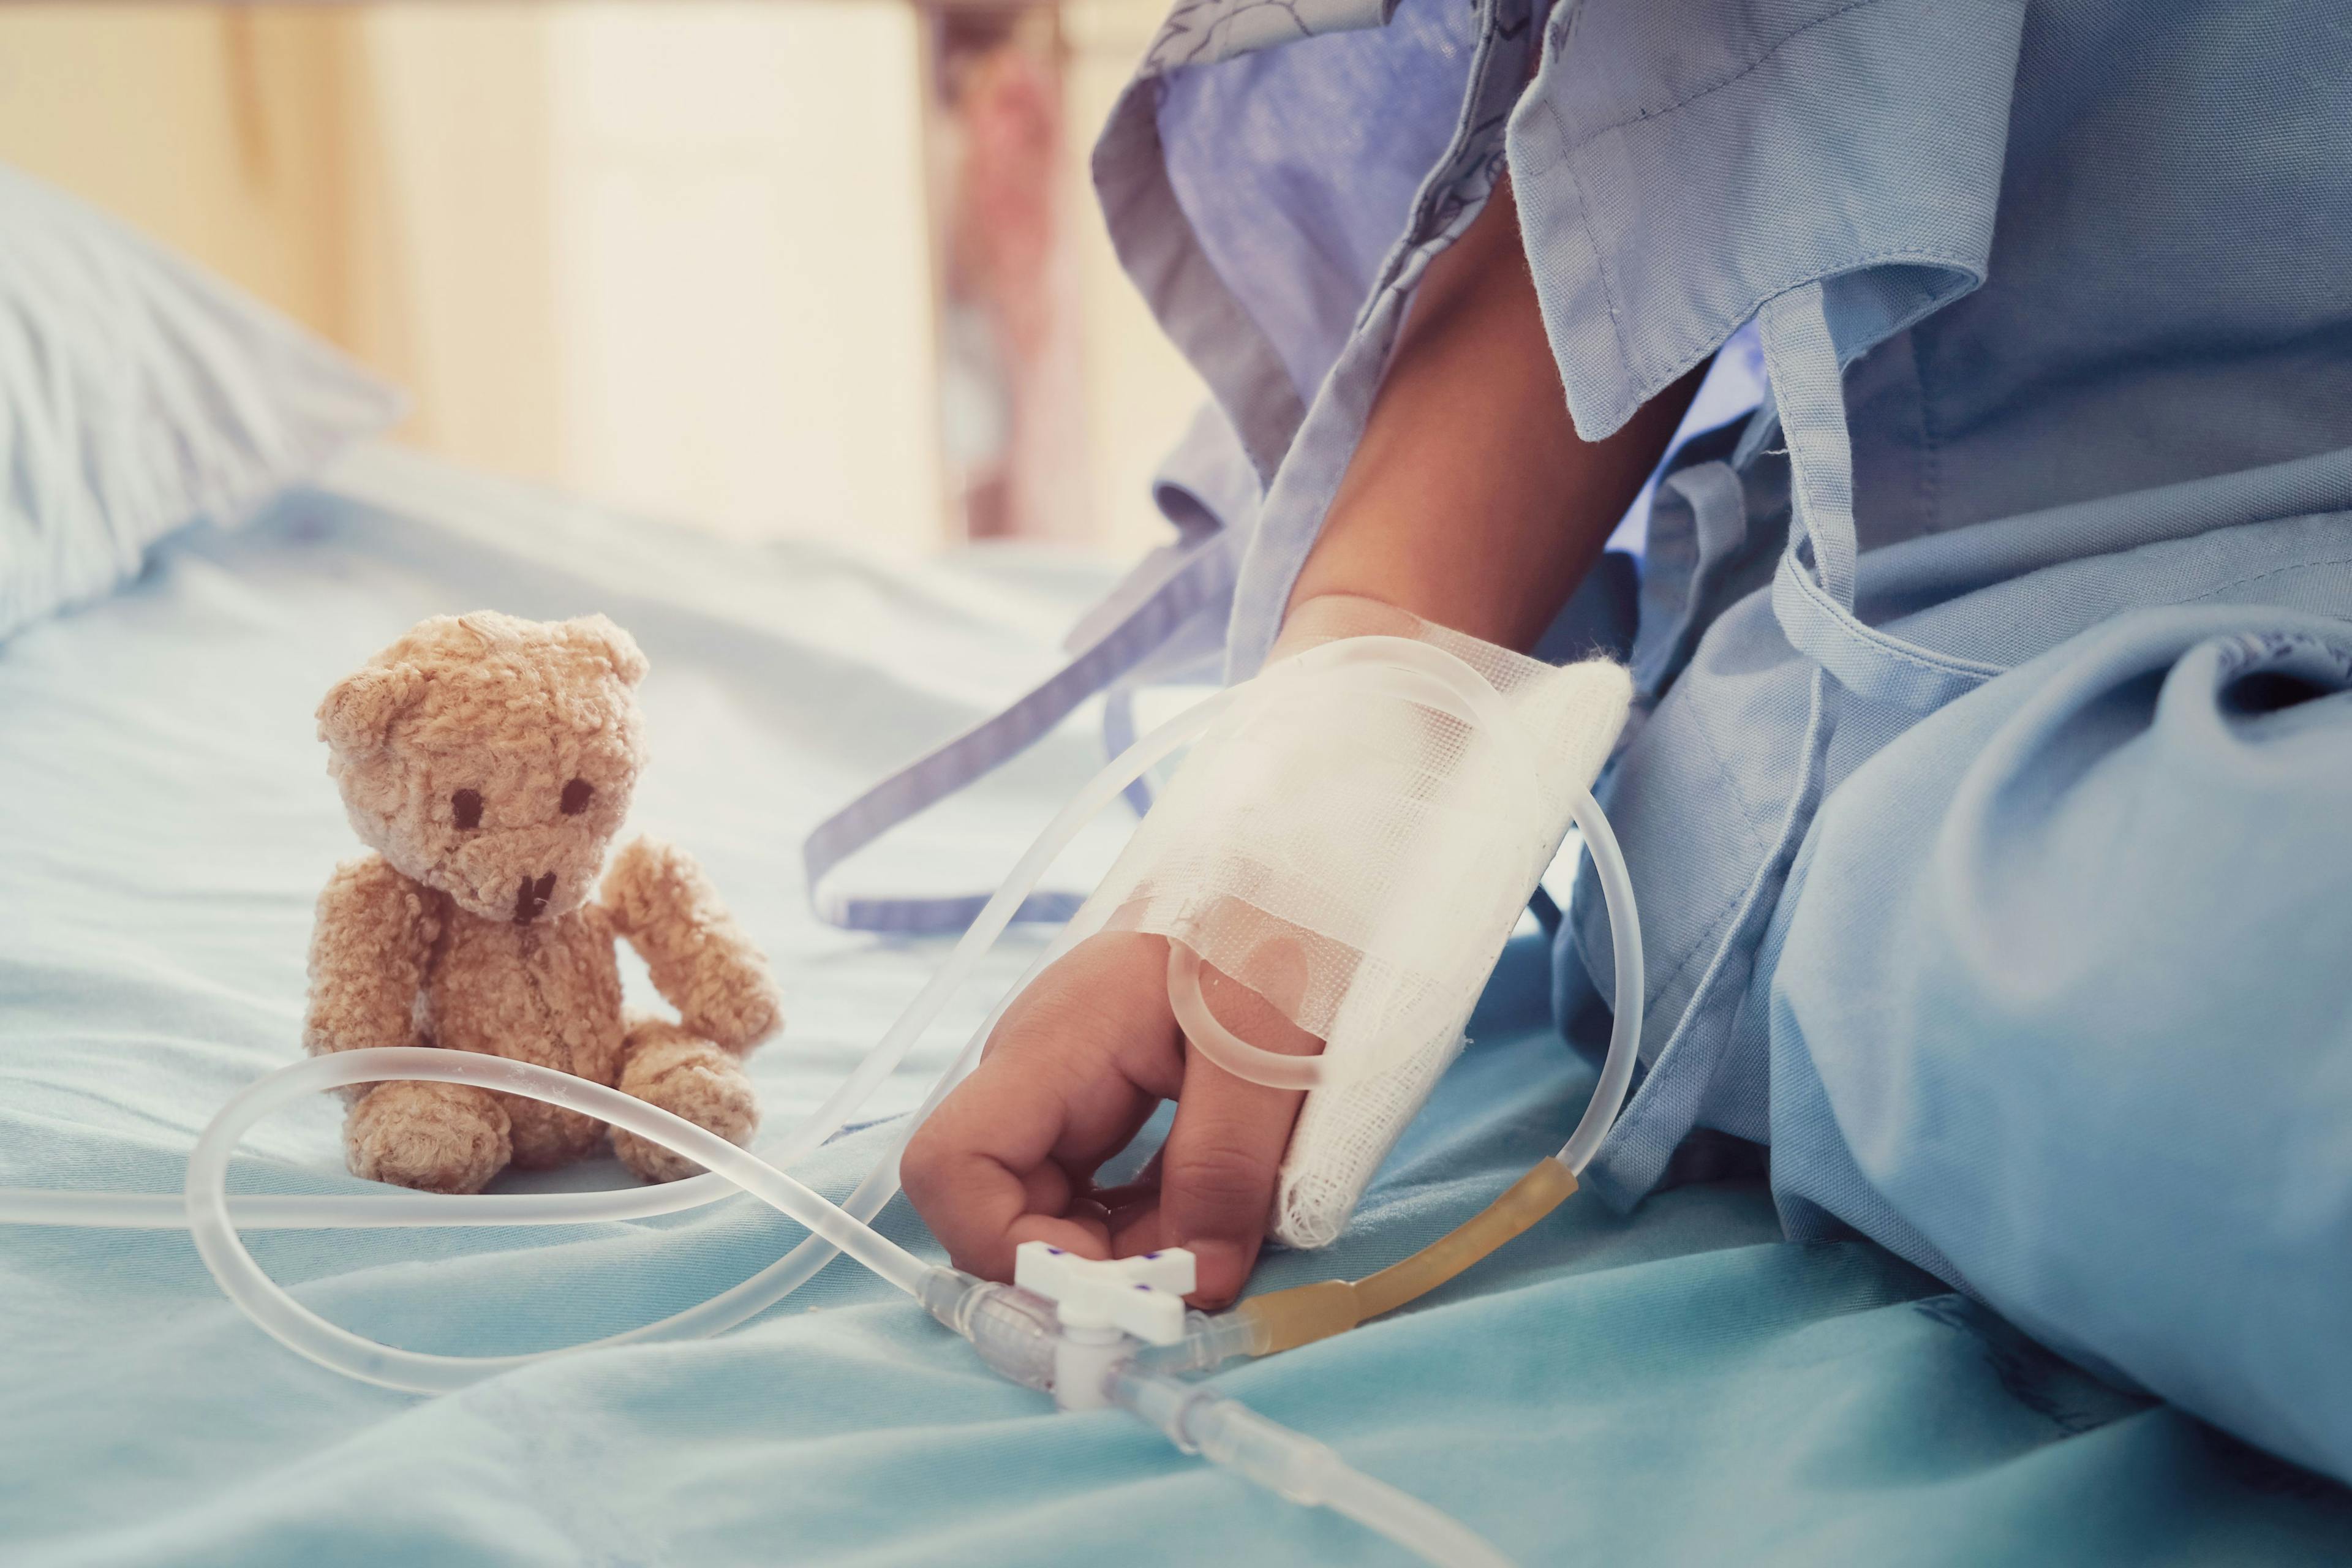 Pediatric intensive care unit (PICU) hospitalizations were 41% lower than expected during the outbreak of COVID-19.